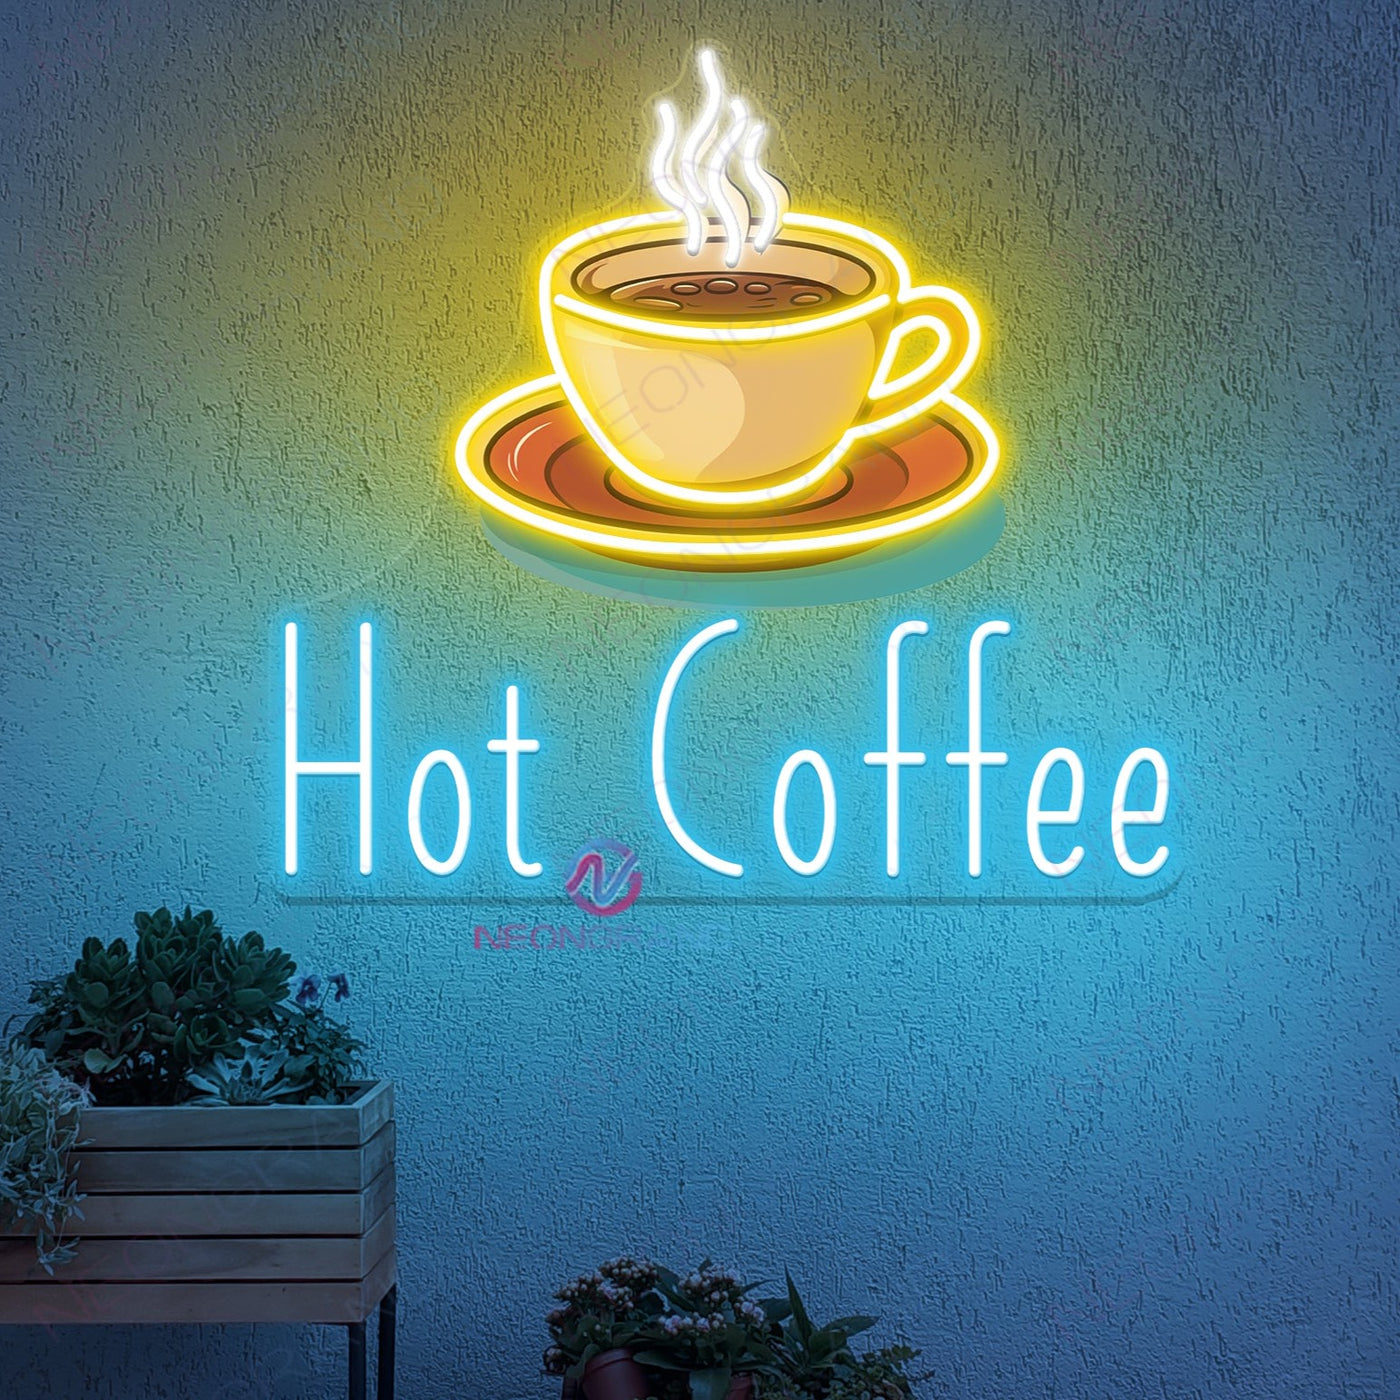 Hot Coffee Neon Sign Led Light For Cafe Shop